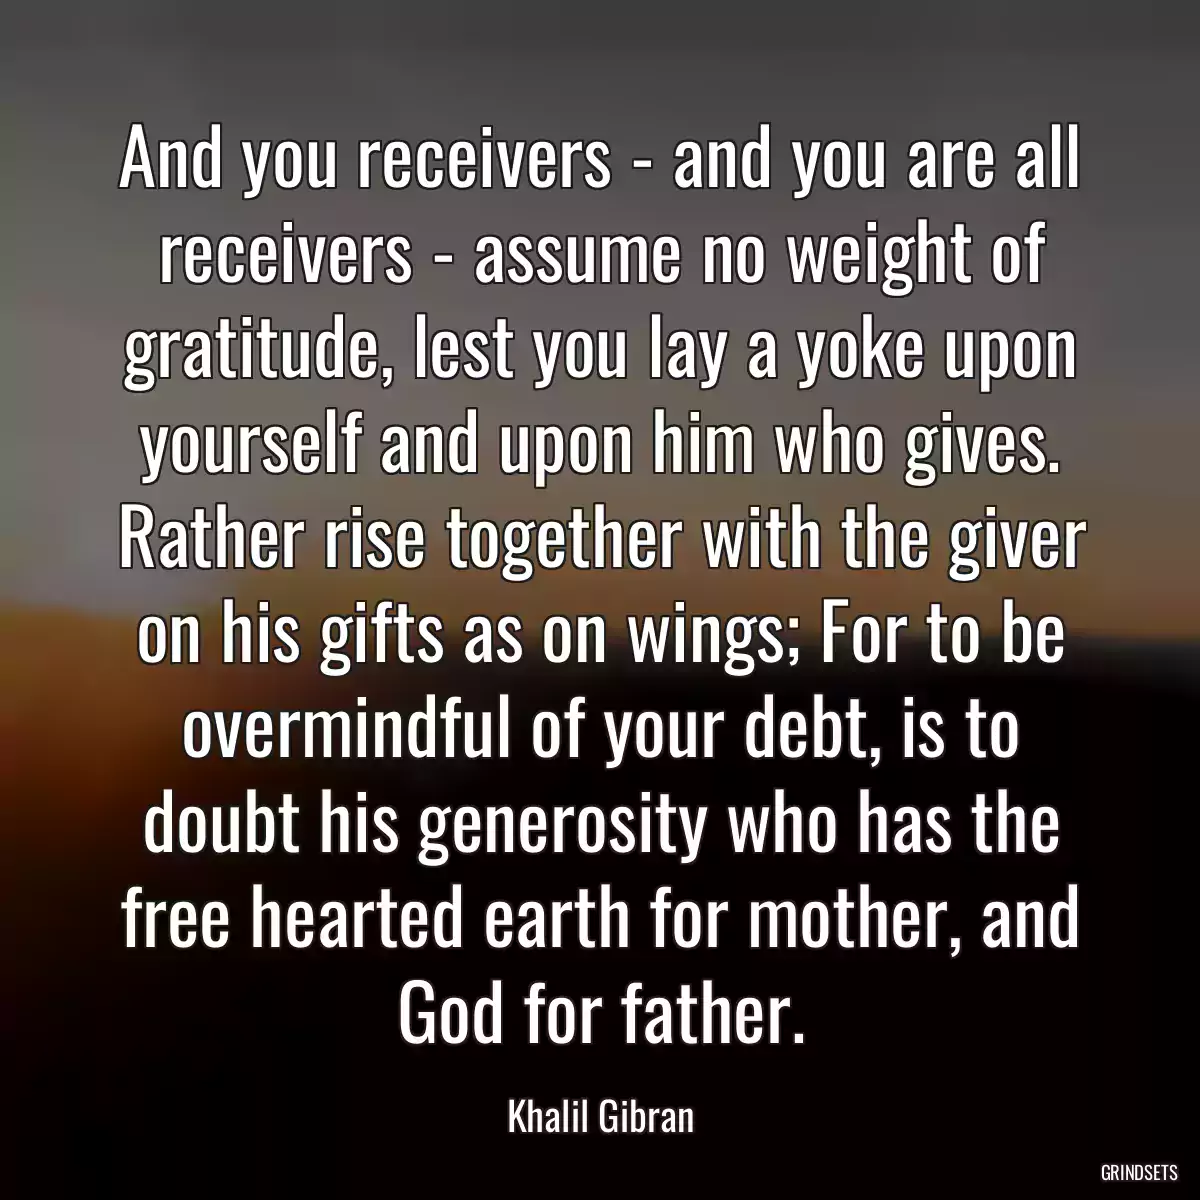 And you receivers - and you are all receivers - assume no weight of gratitude, lest you lay a yoke upon yourself and upon him who gives. Rather rise together with the giver on his gifts as on wings; For to be overmindful of your debt, is to doubt his generosity who has the free hearted earth for mother, and God for father.